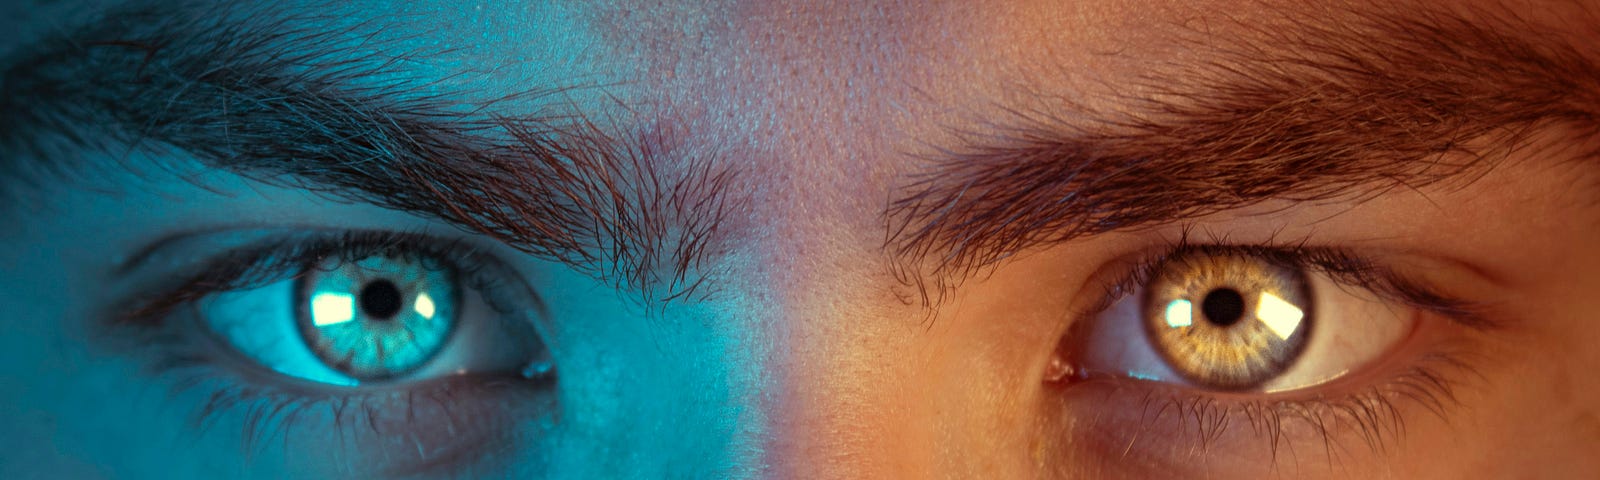 A picture showing a man’s eyes and the surrounding area of the face. One side is coloured in a cold blue, including the left eye’s iris. The other side is coloured in a warm orange.